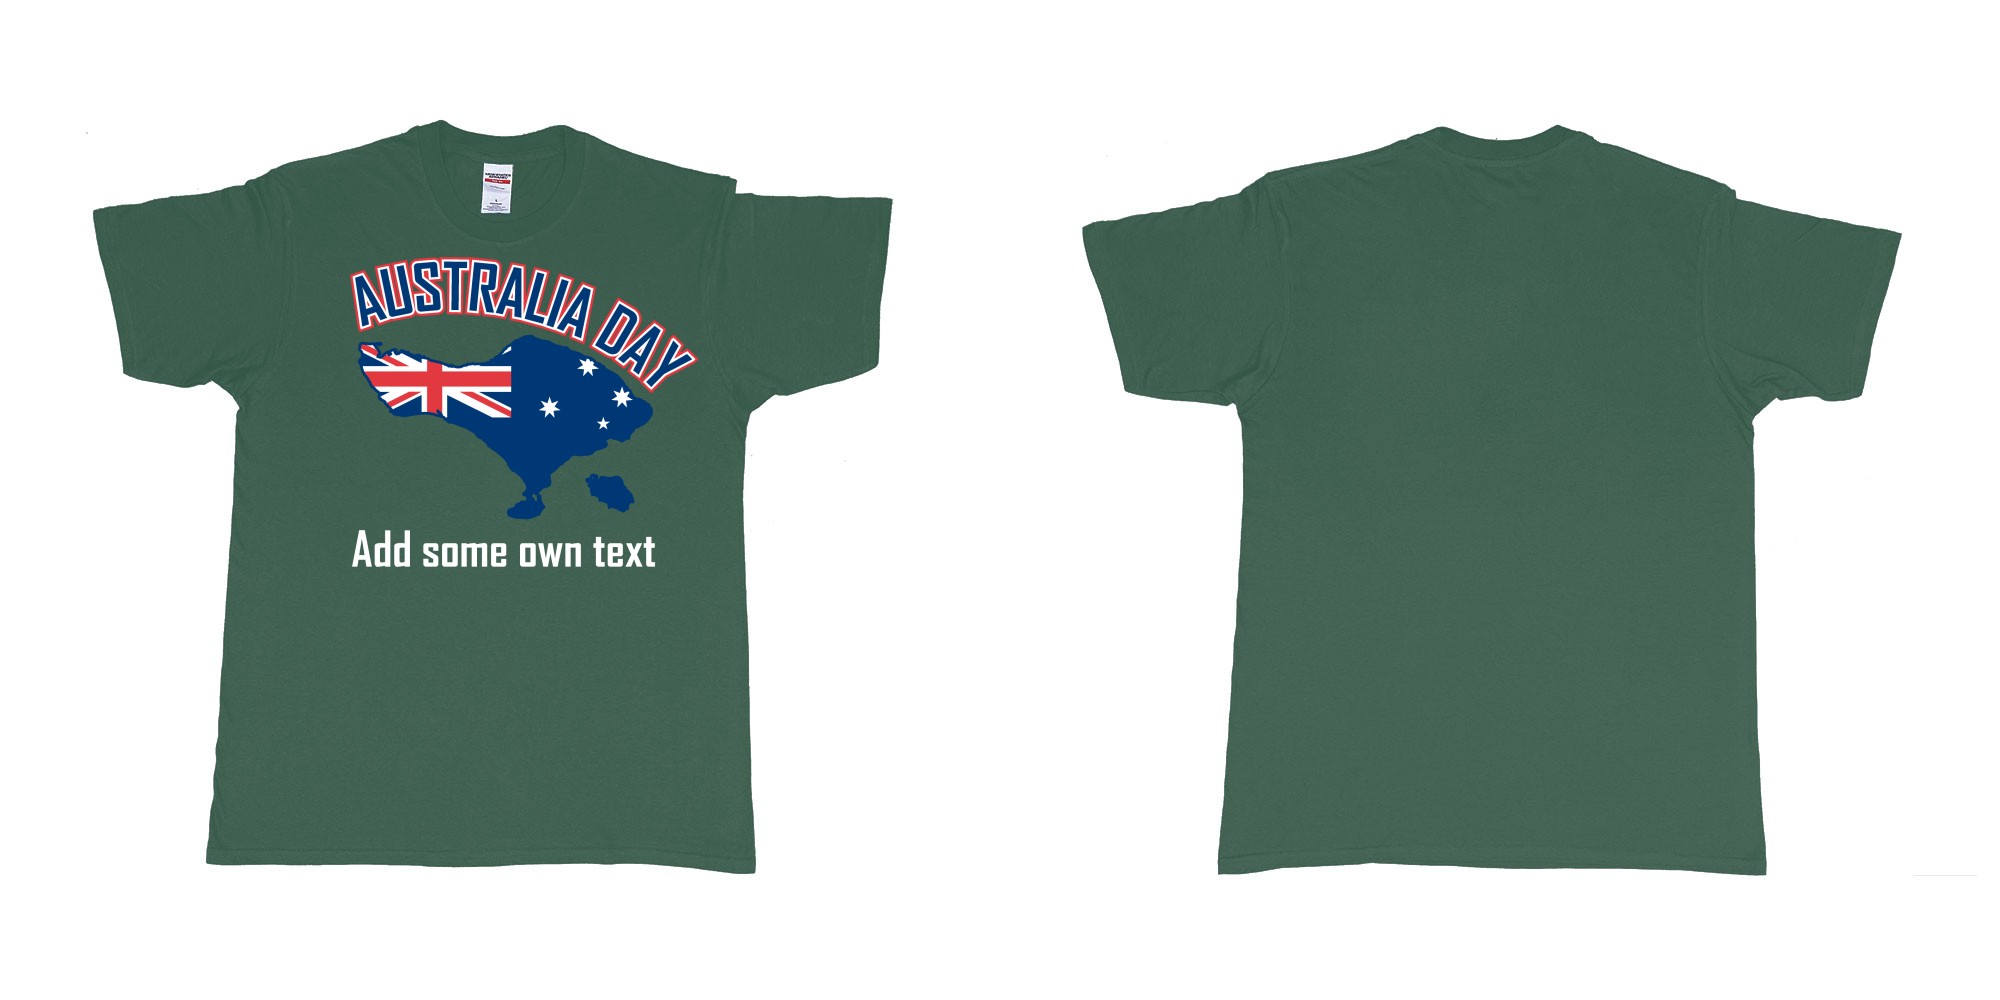 Custom tshirt design australia day in bali custom teeshirt printing in fabric color forest-green choice your own text made in Bali by The Pirate Way